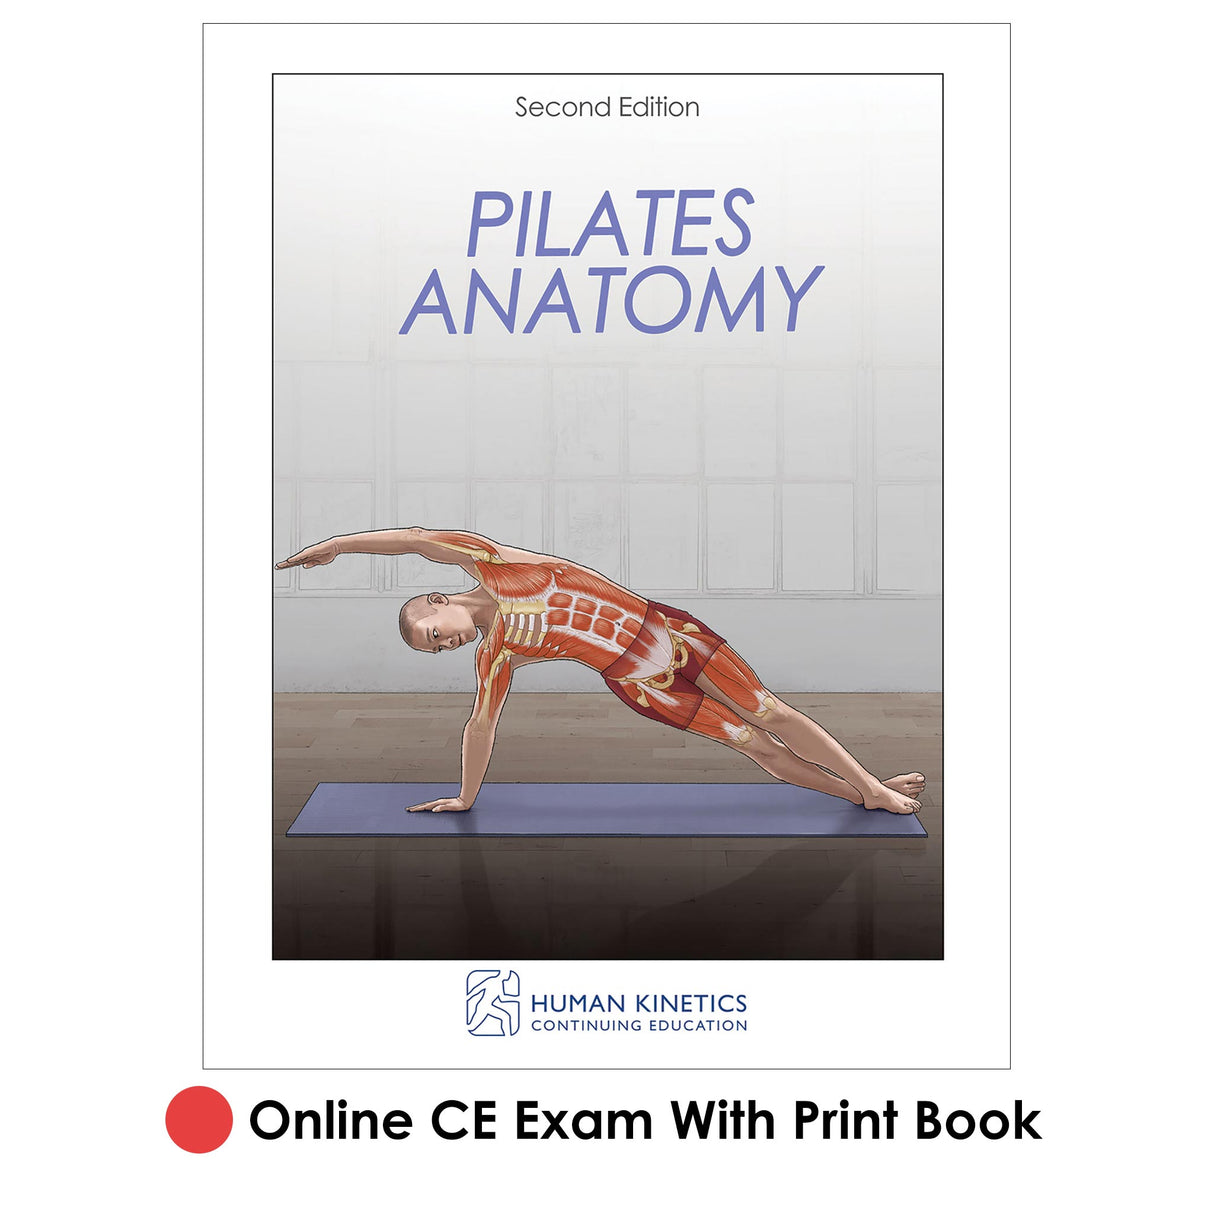 Pilates Anatomy 2nd Edition Online CE Exam With Print Book